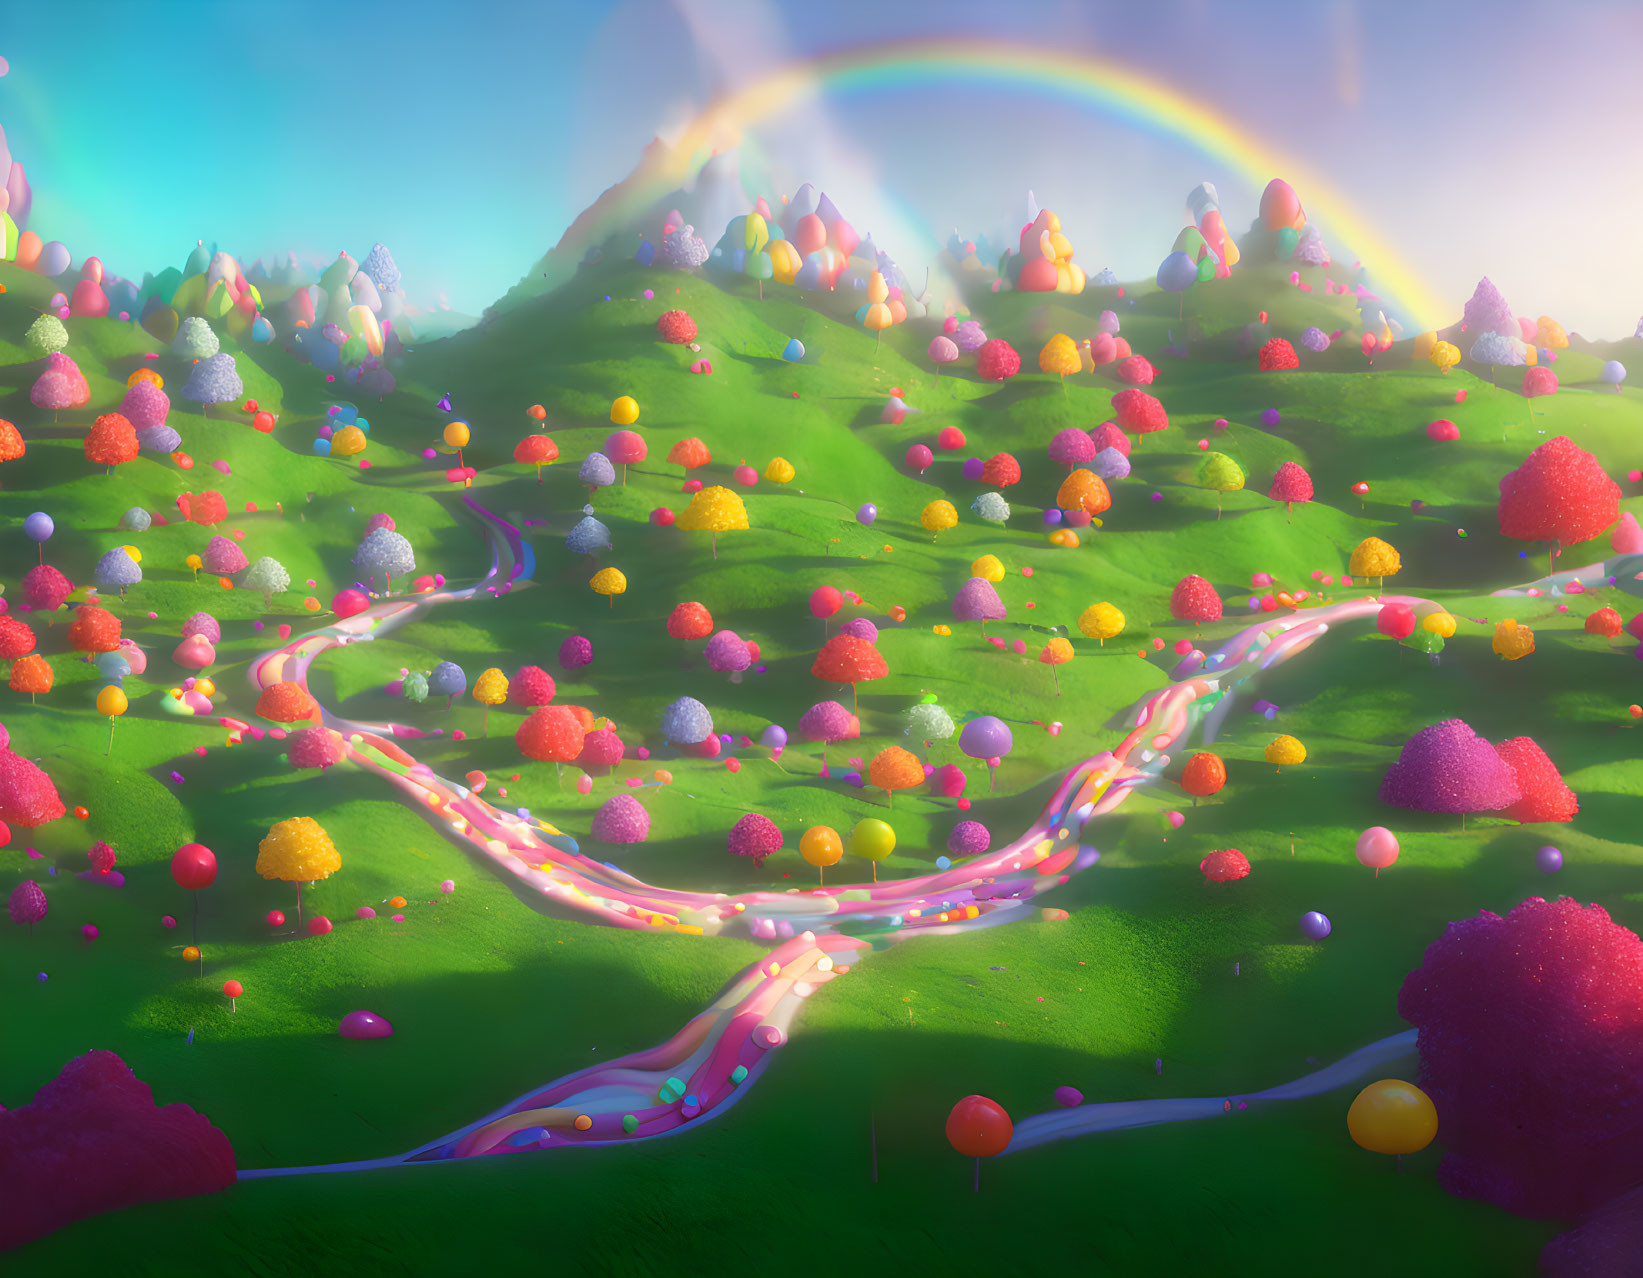 Colorful Fantasy Landscape with Rainbow Trees and Winding Paths